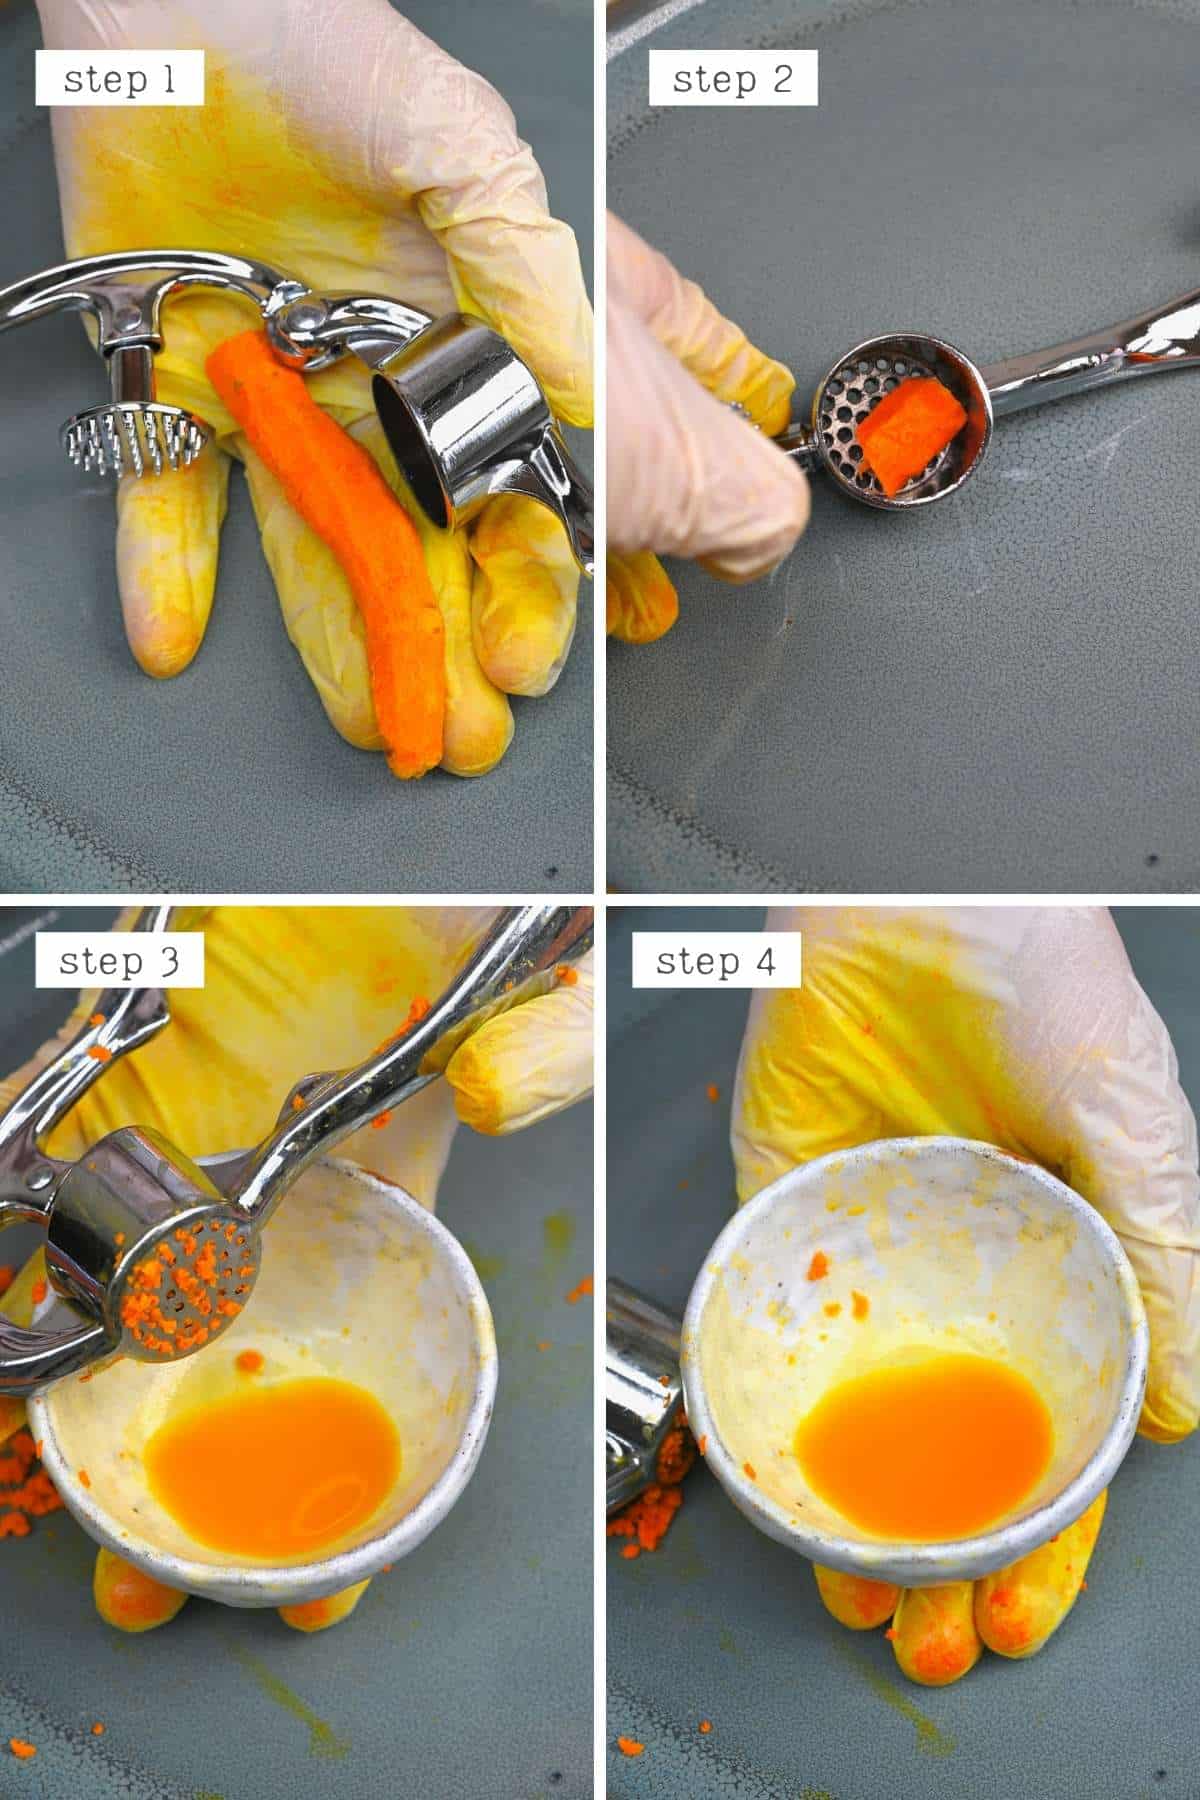 Steps for making turmeric juice with a garlic press